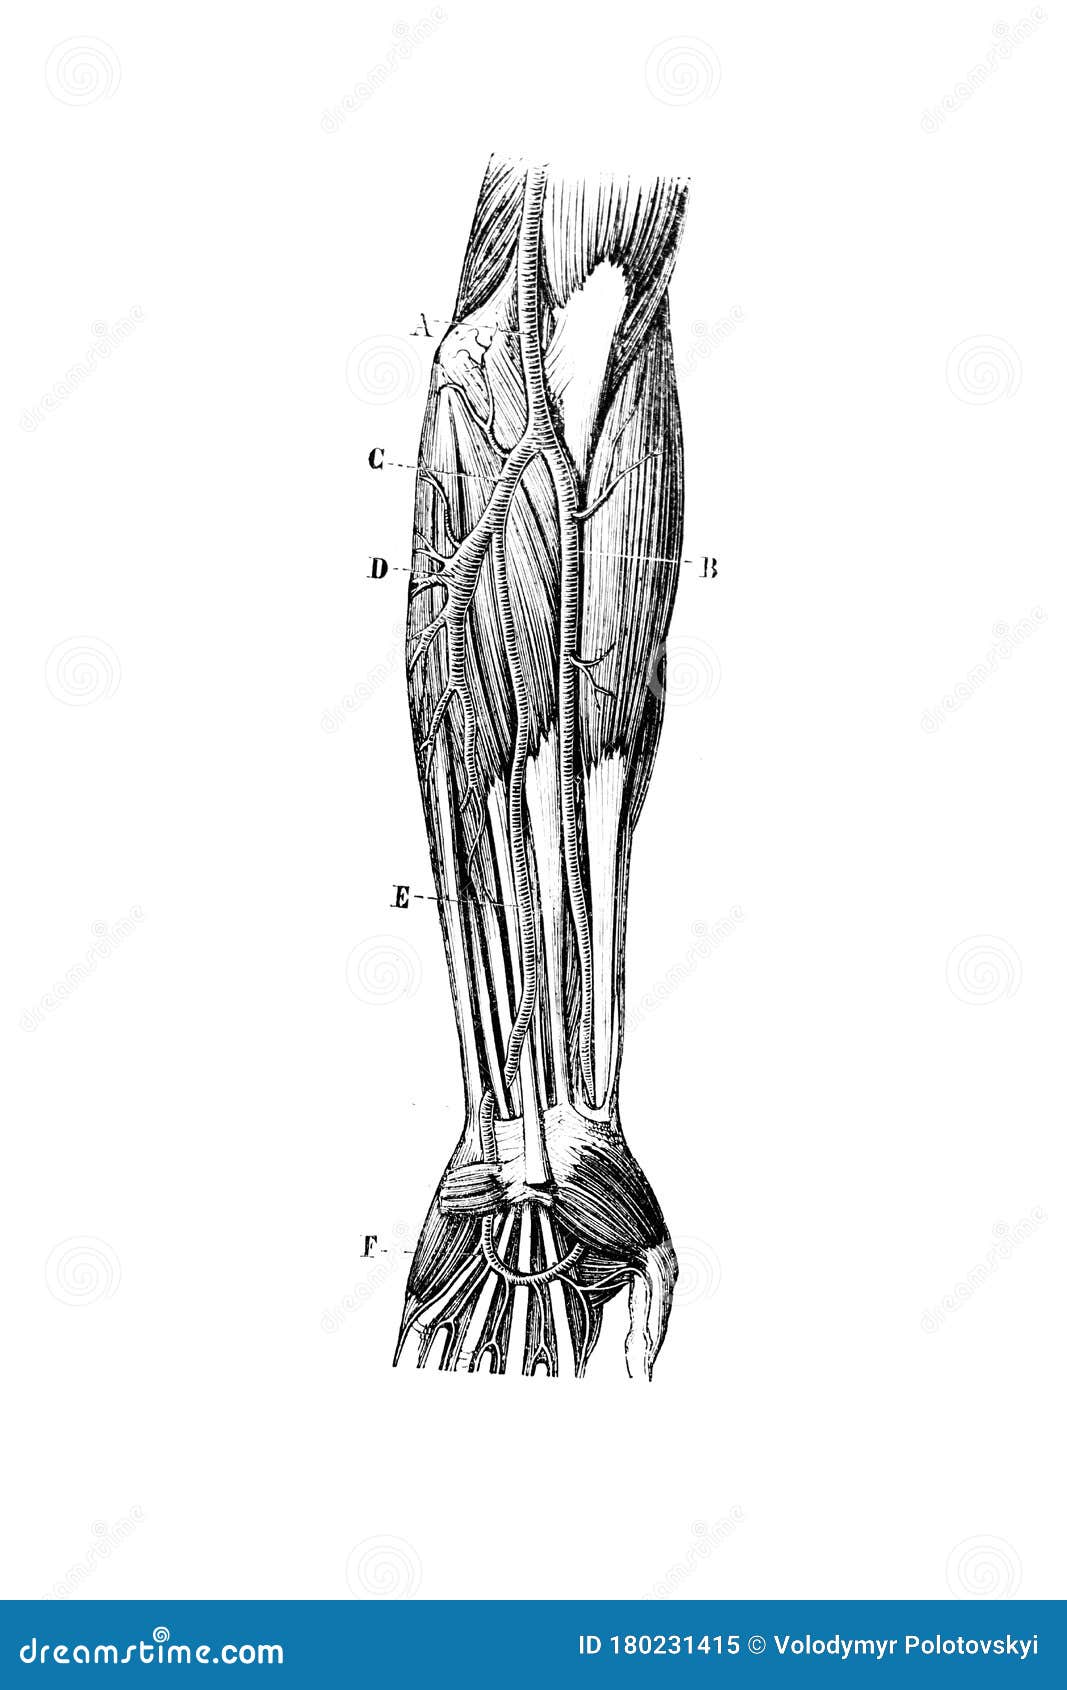 cubital artery abnormality in the old book d`anatomie chirurgicale, by b. anger, 1869, paris